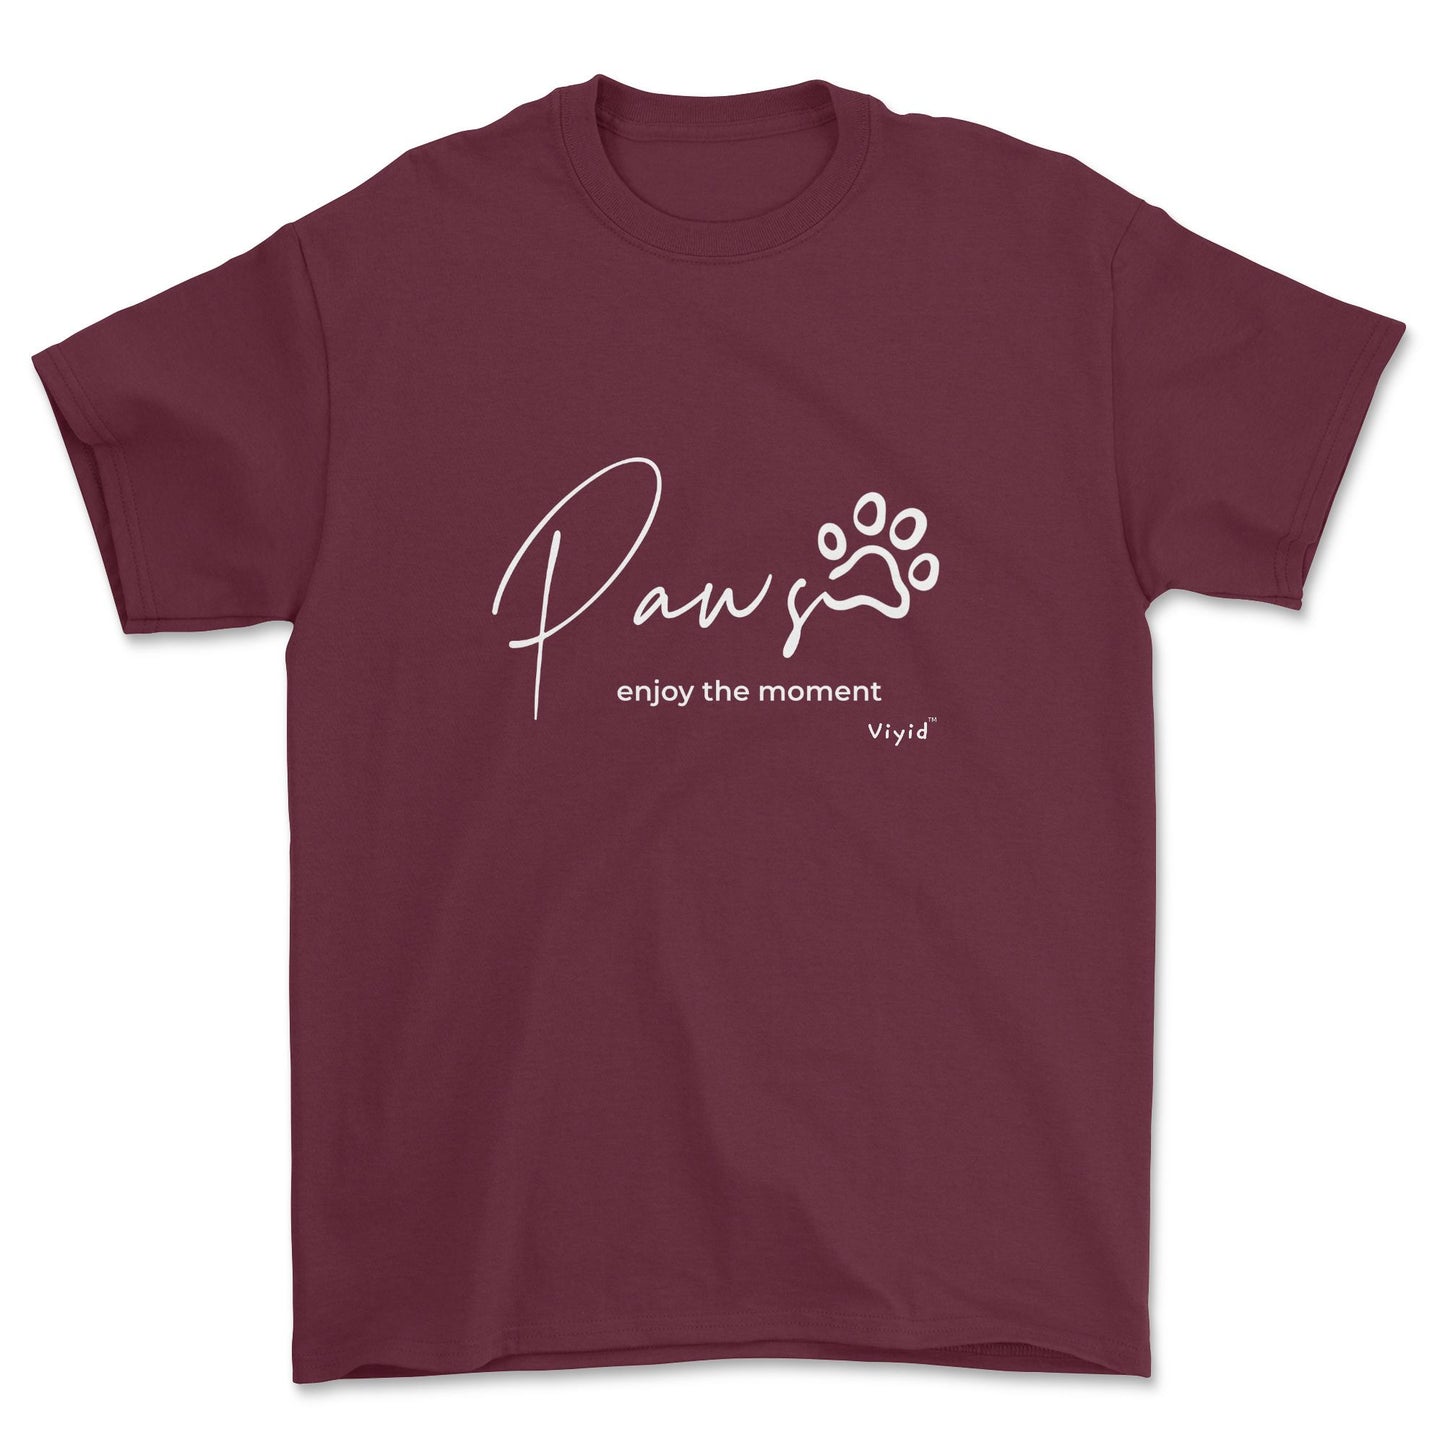 paws enjoy the moment youth t-shirt maroon